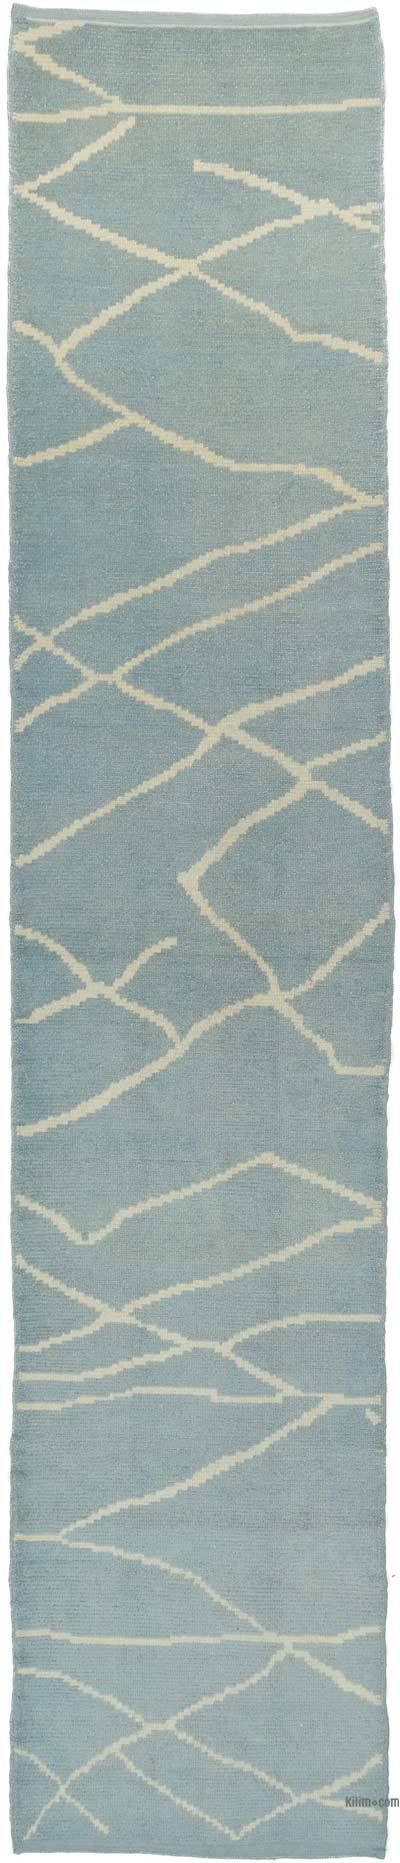 New Moroccan Style Hand-Knotted Runner - 2' 11" x 14' 4" (35 in. x 172 in.)